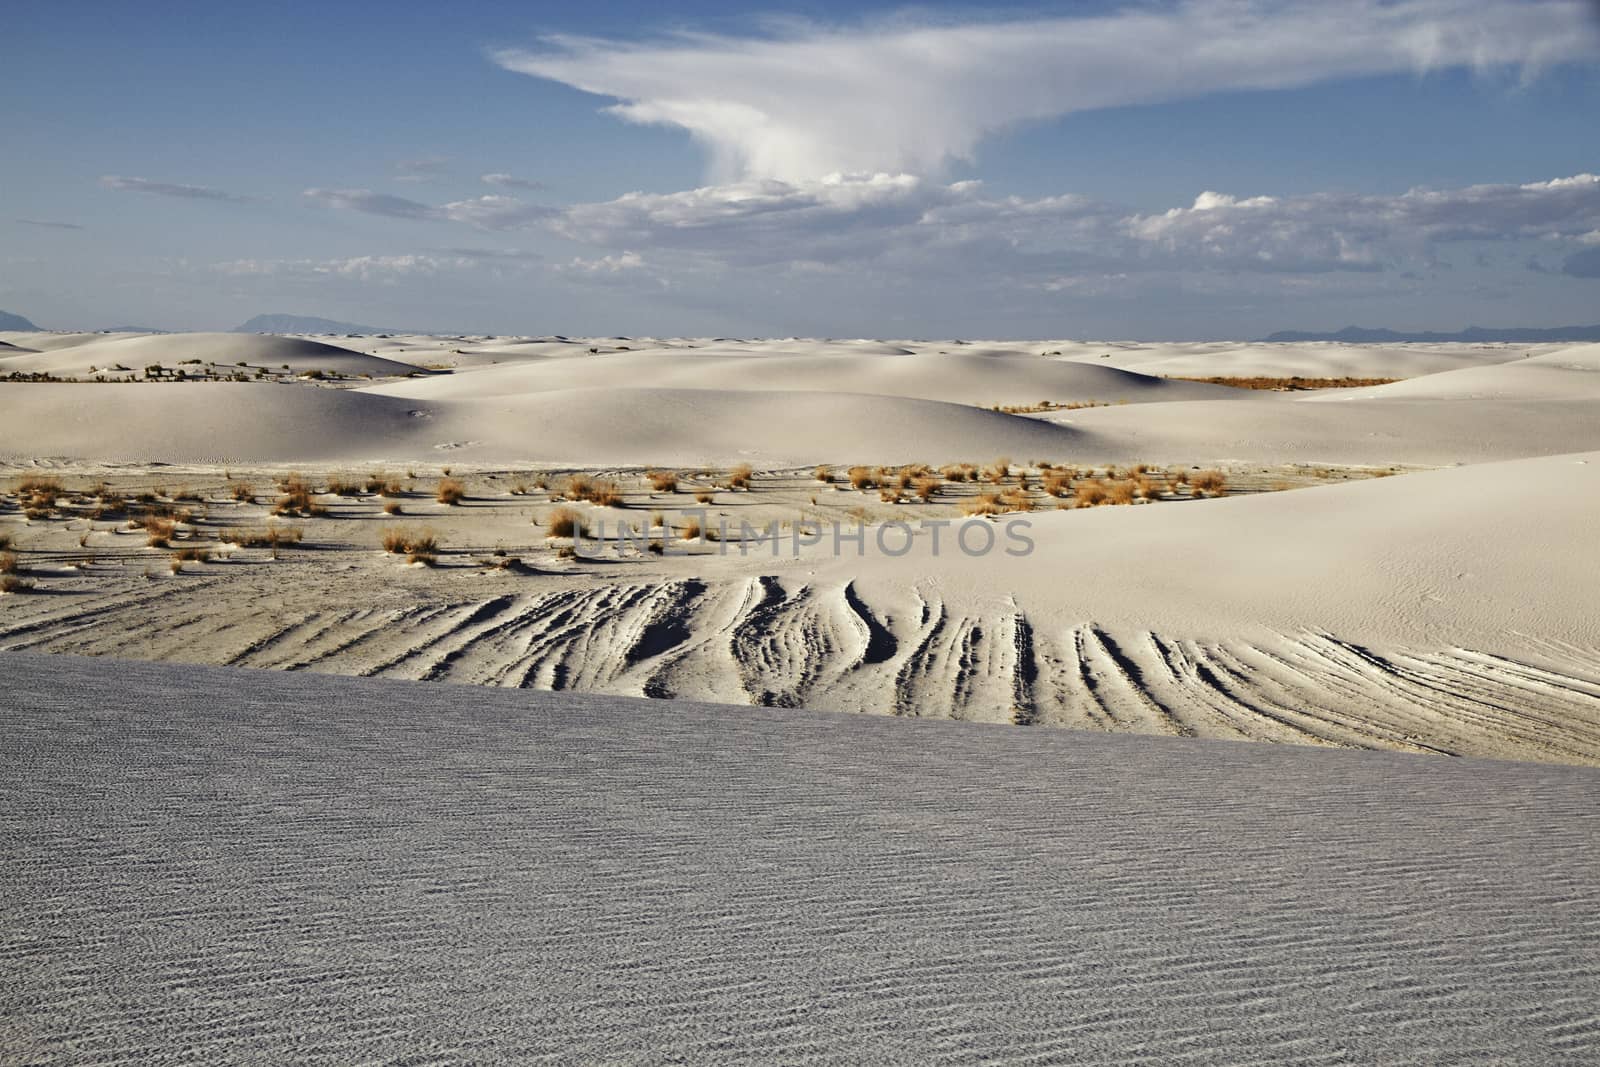 Tranquil image of sand dunes and beautiful blue sky, White Sands National Monument